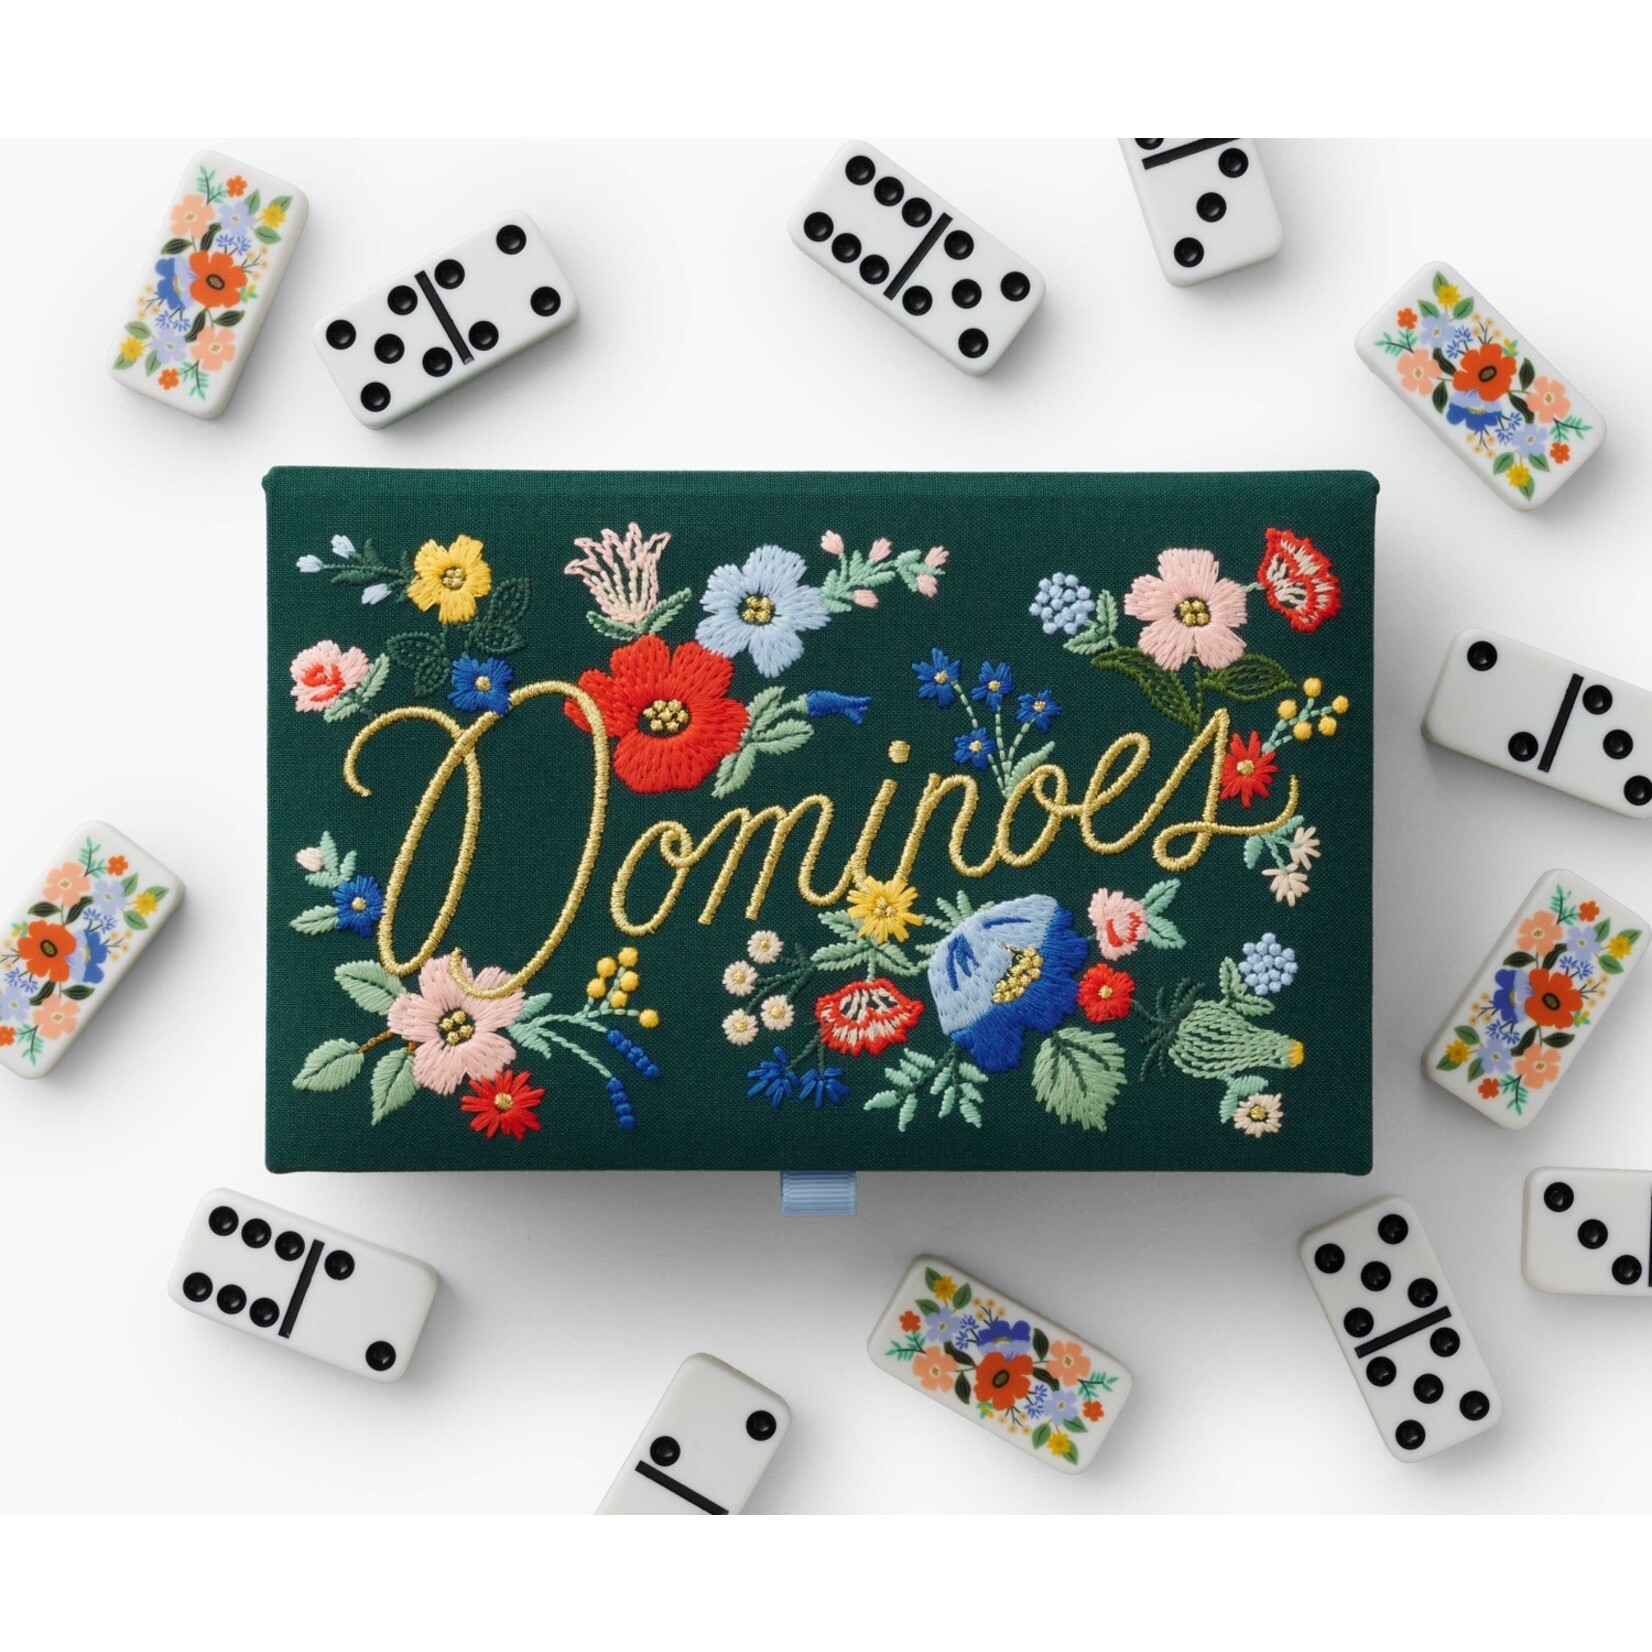 Rifle Paper Co. Strawberry Fields Dominoes Set